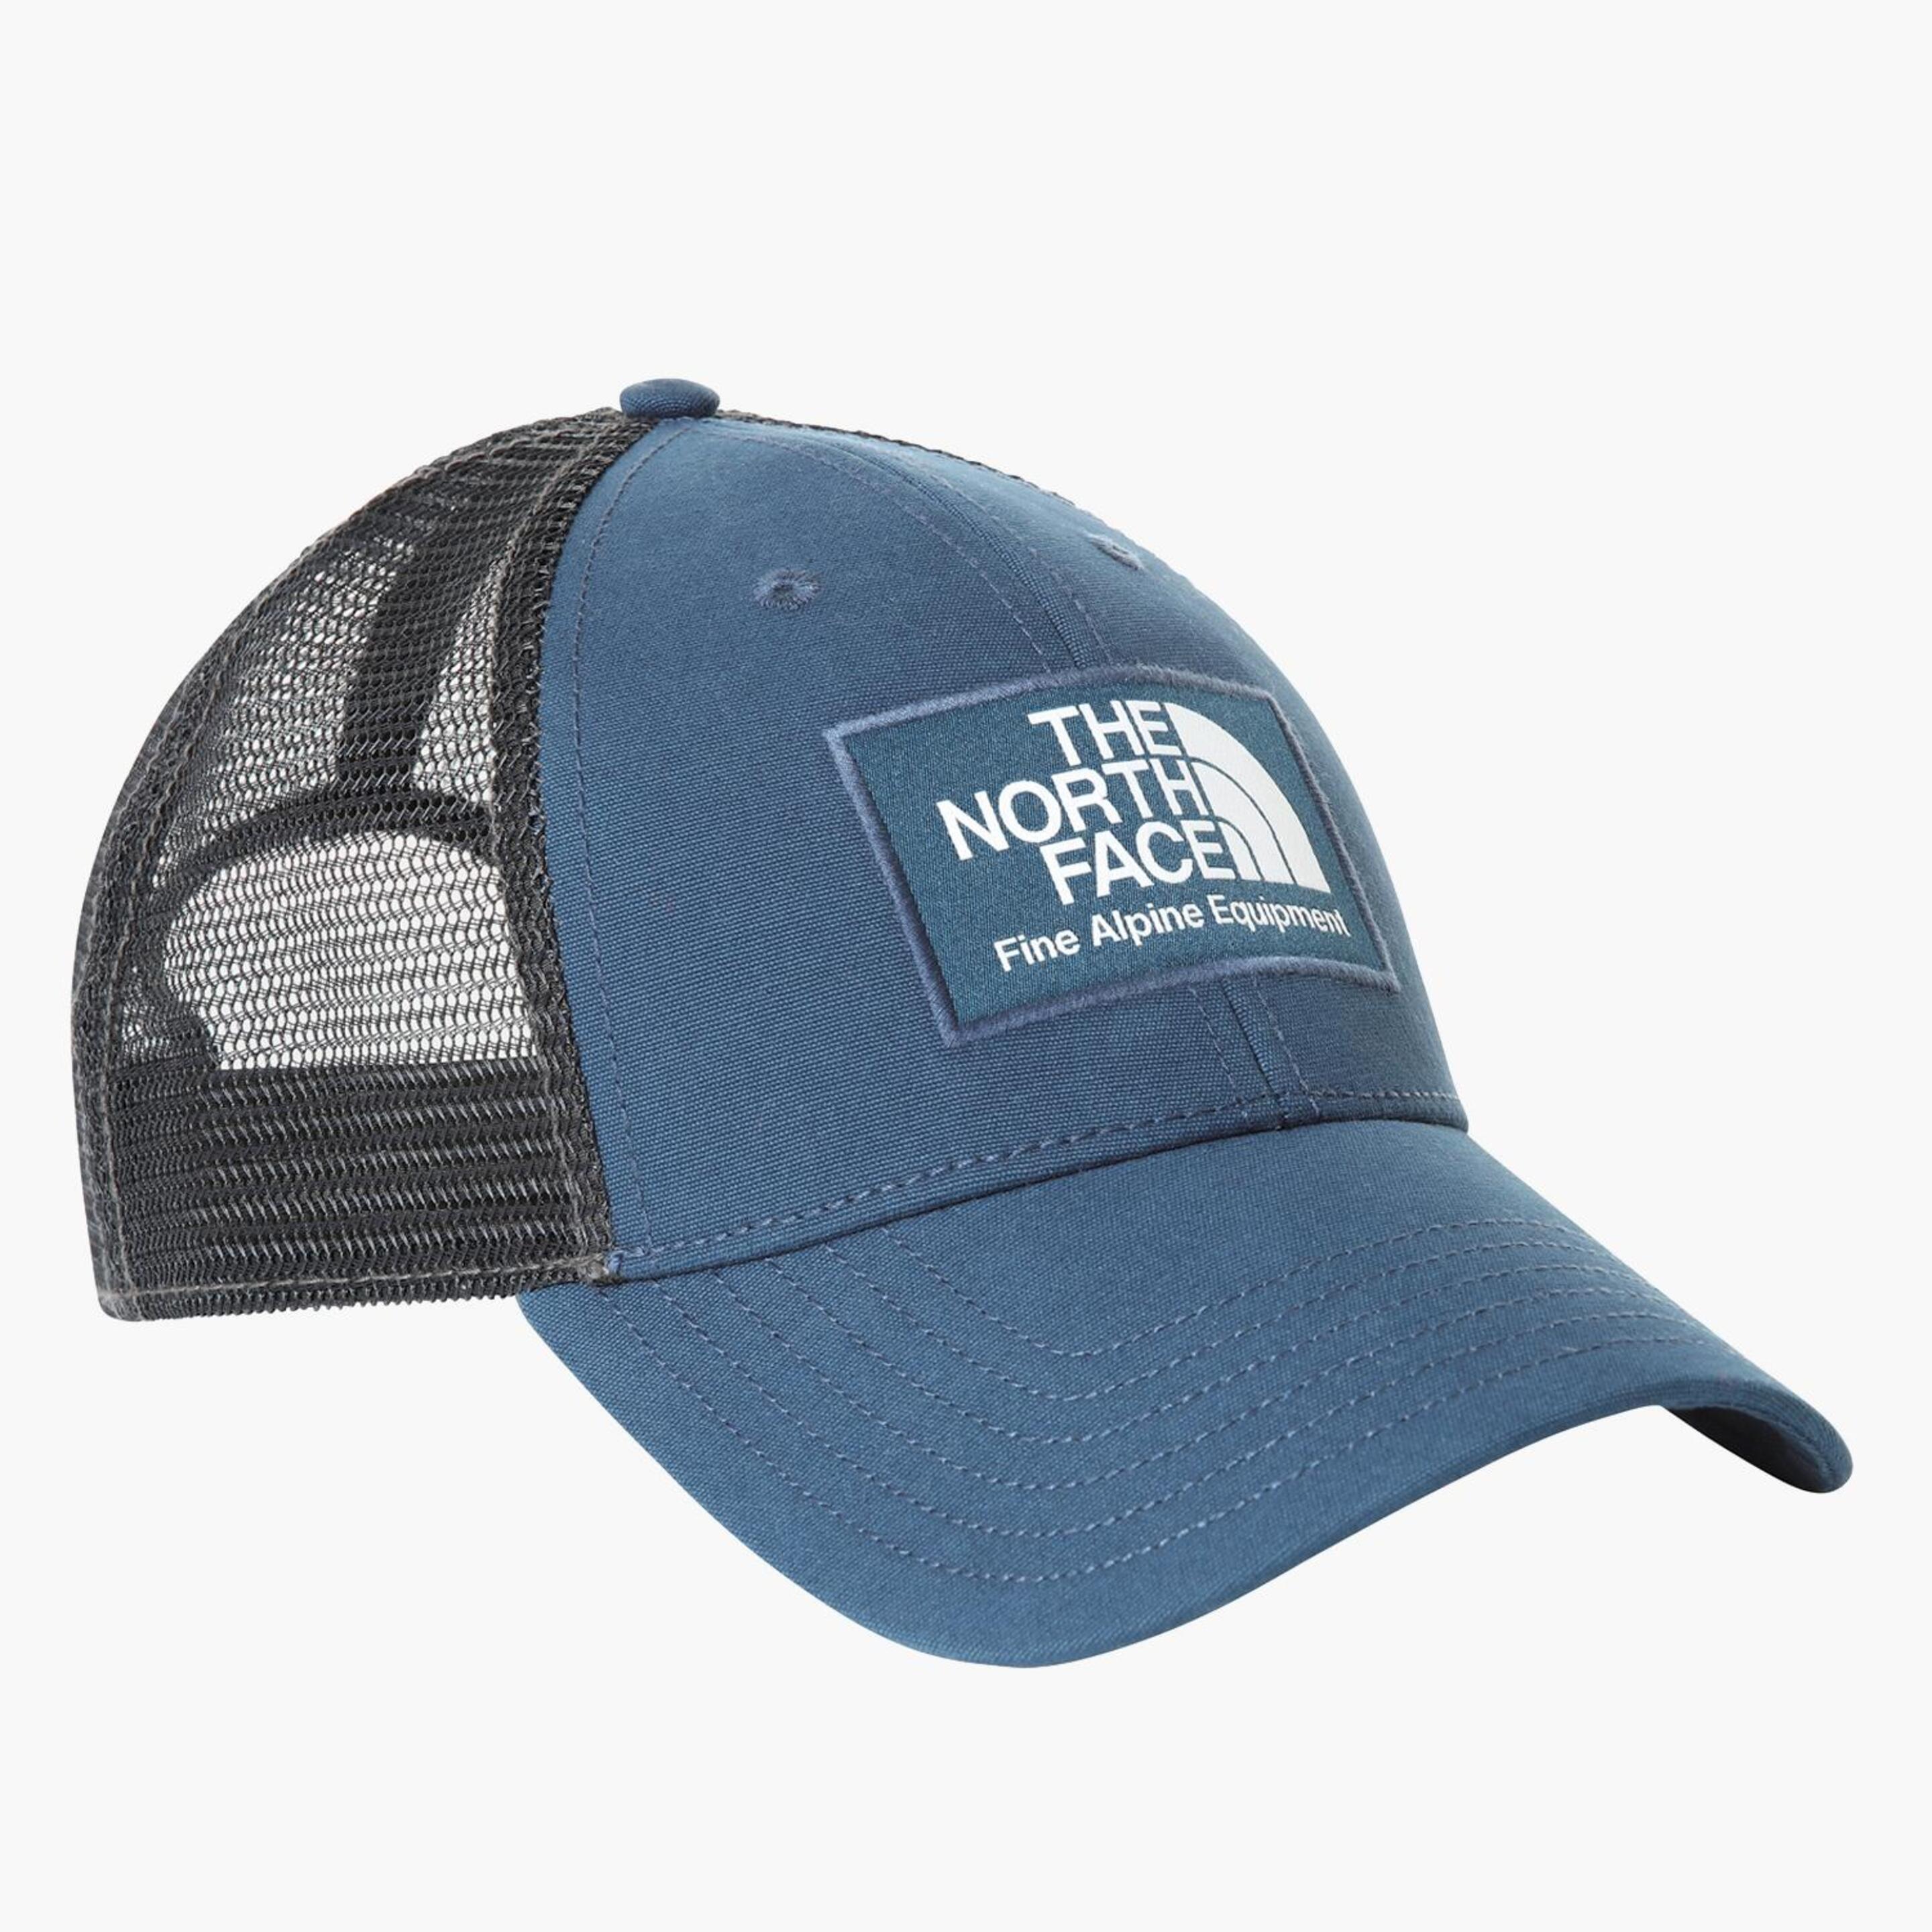 The North Face Trucker